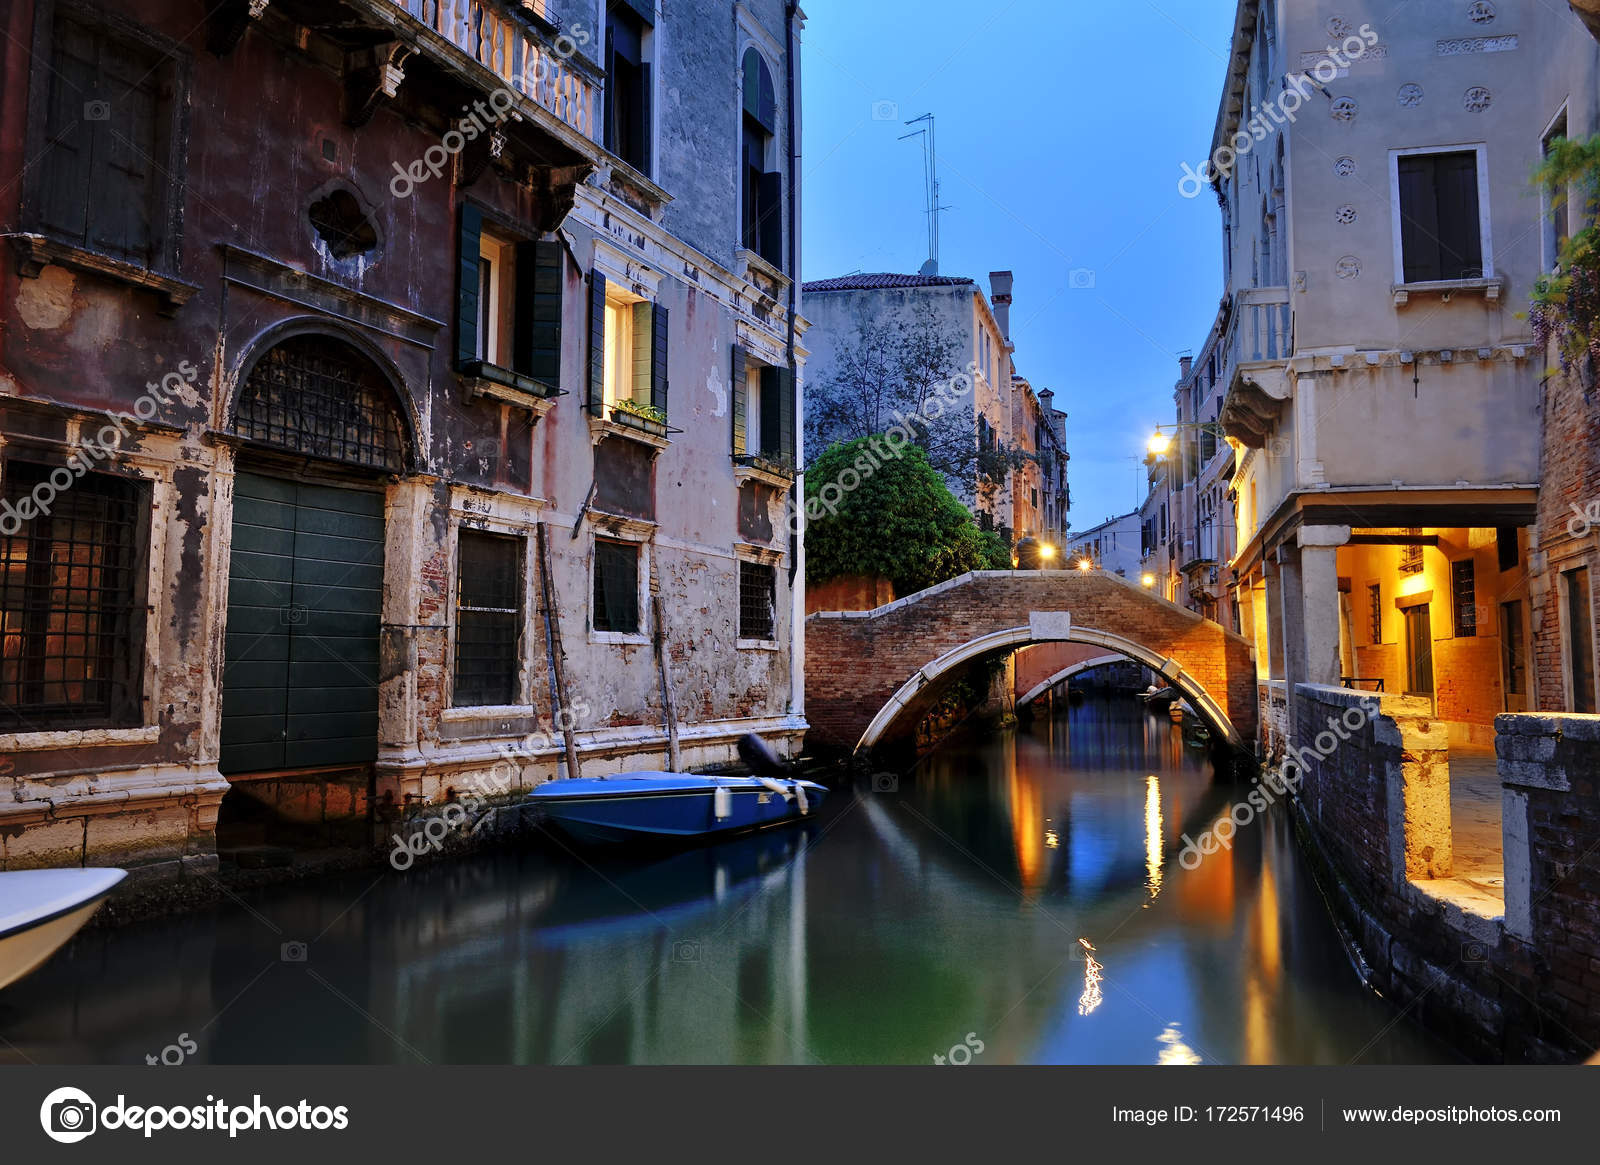 Romantic Night View Of A Canal Venice Italy Stock Photo Image By C Tanialerro 172571496